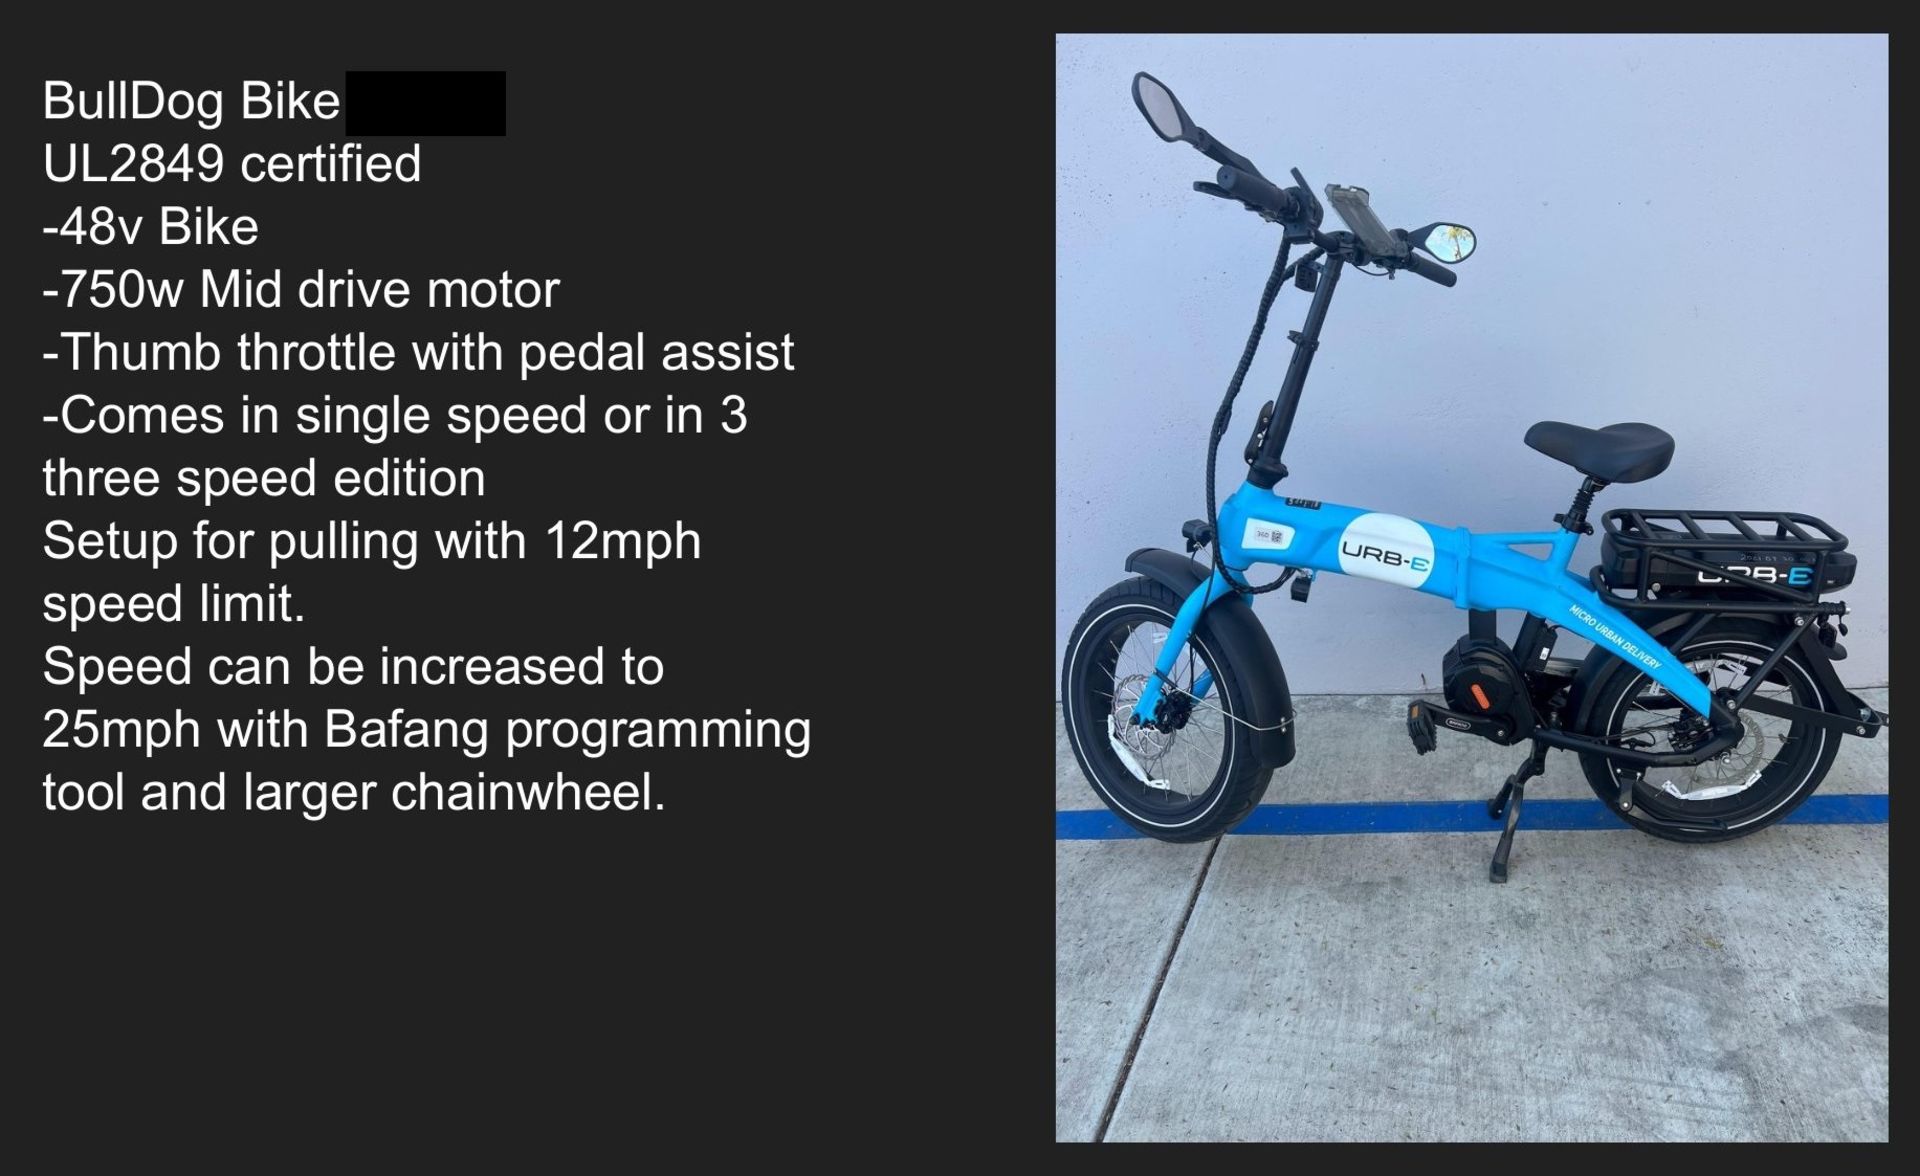 URB-E ELECTRIC DELIVERY BIKE, USED, 750W MID DRIVE MOTOR, SINGLE SPEED, THUMB THROTTLE WITH PEDAL - Bild 4 aus 4